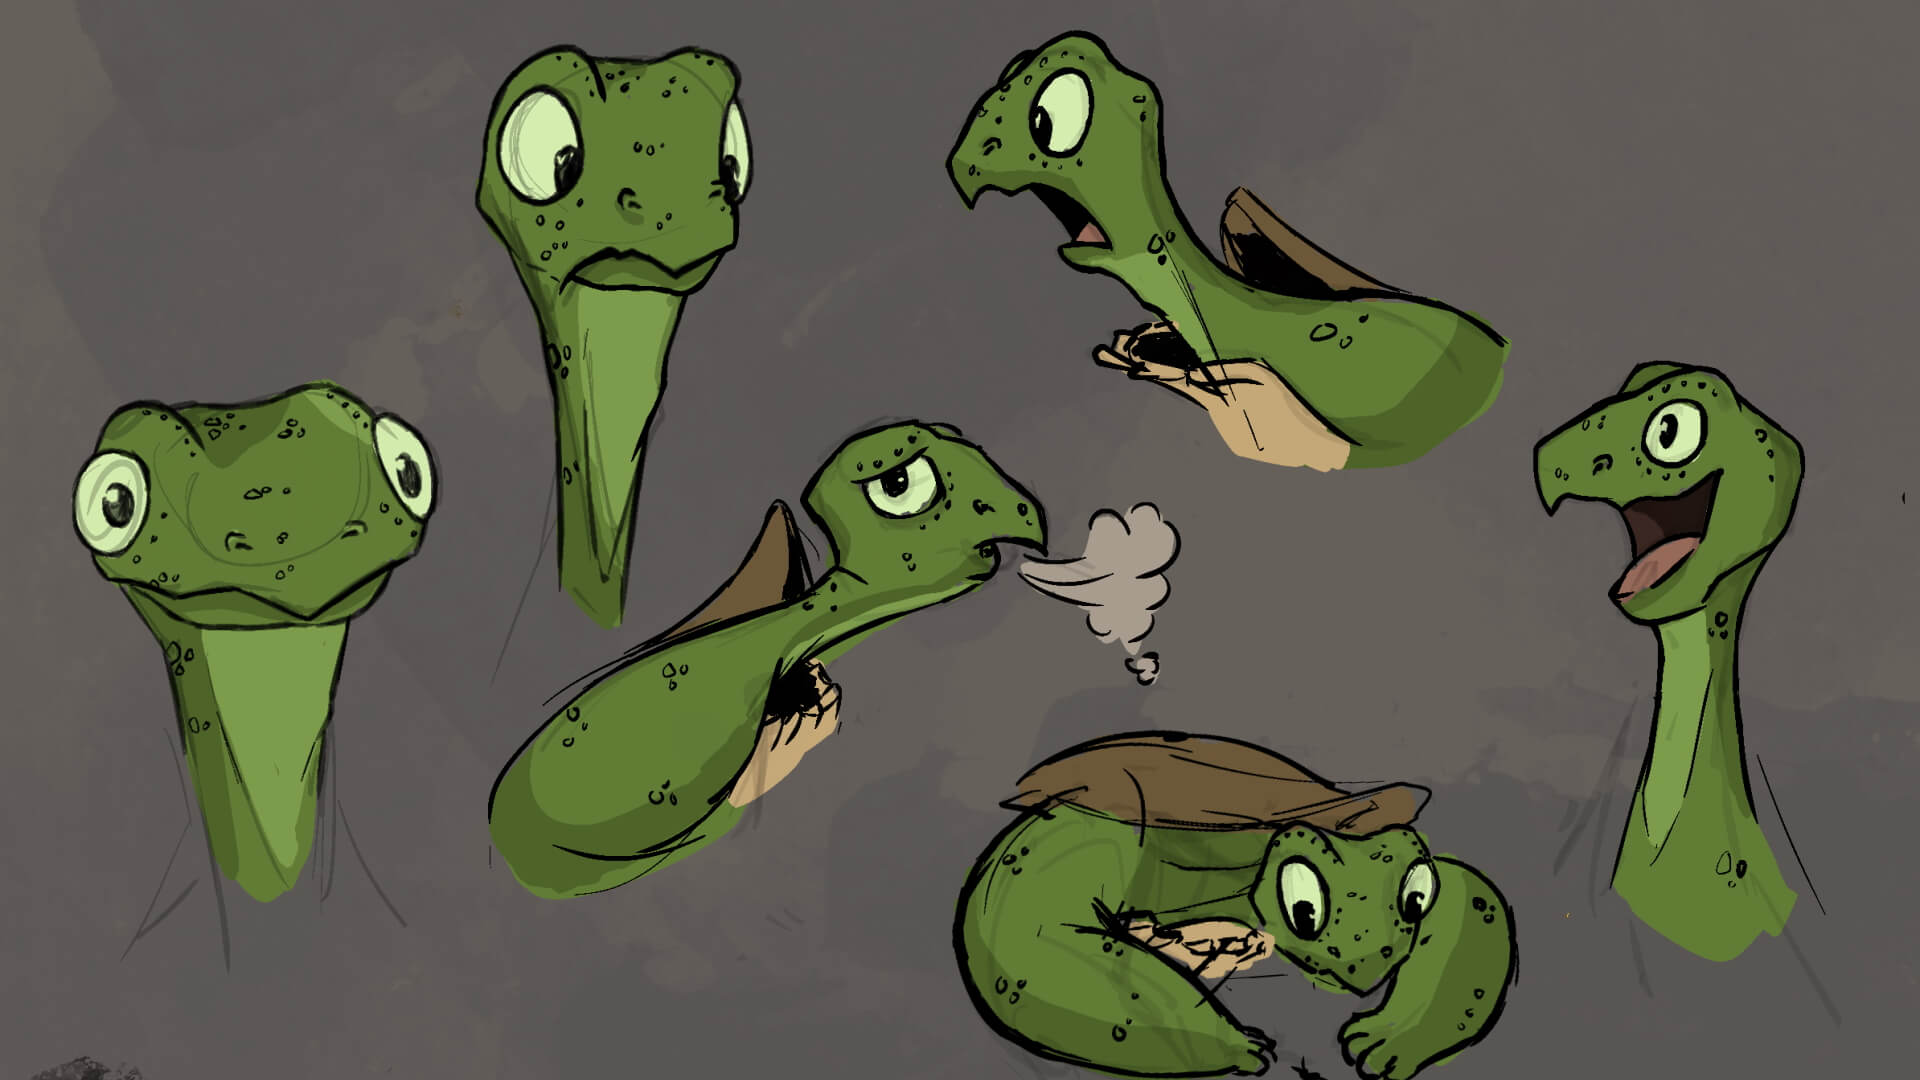 Sketches of a turtle-like character displaying various facial expressions on a gray background.